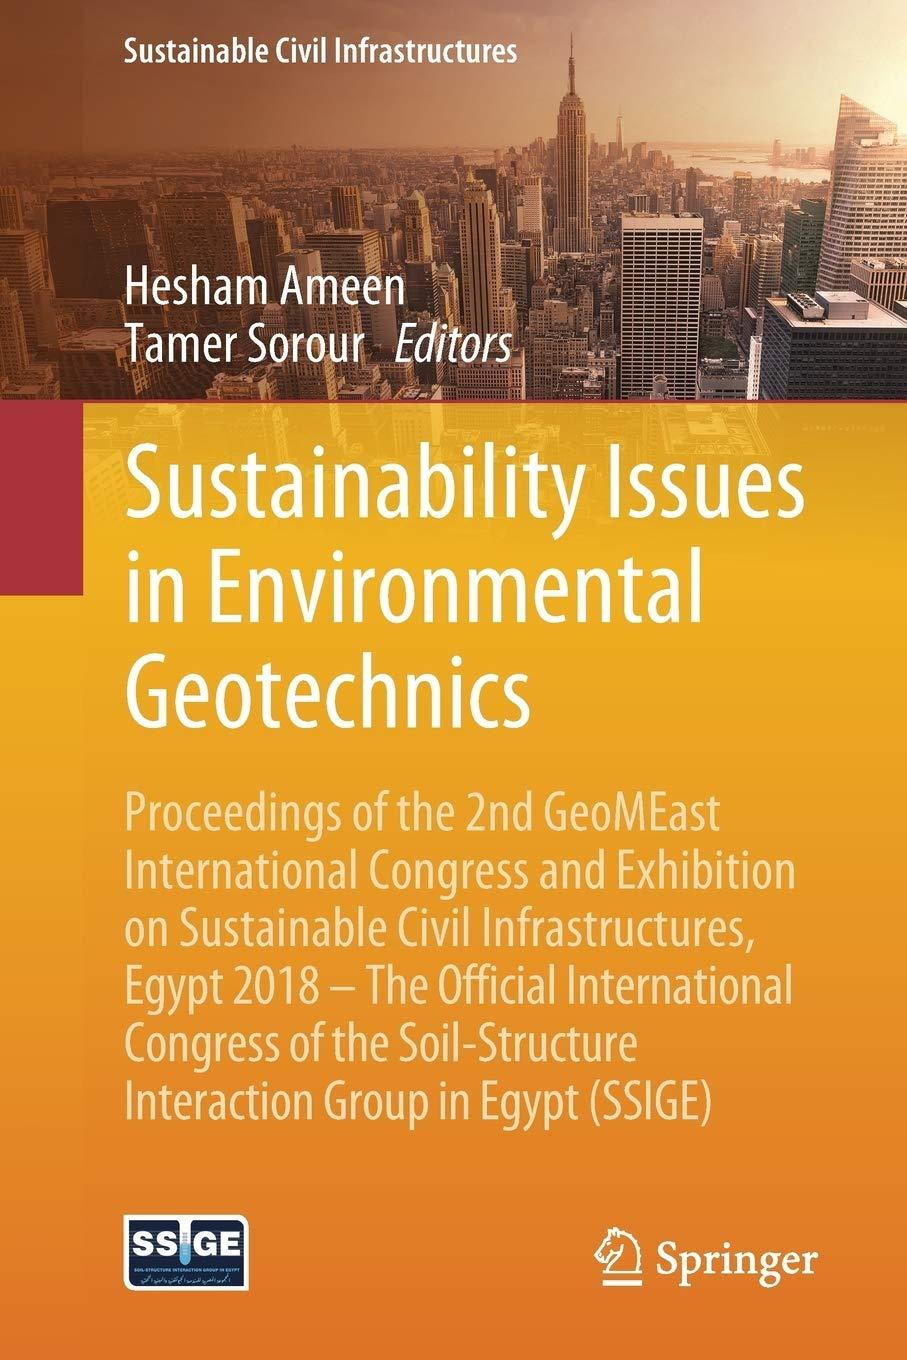 Sustainability Issues In Environmental Geotechnics Proceedings Of The 2nd GeoMEast International Congress And Exhibition On Sustainable Civil ... Interaction Group In Egypt SSIGE